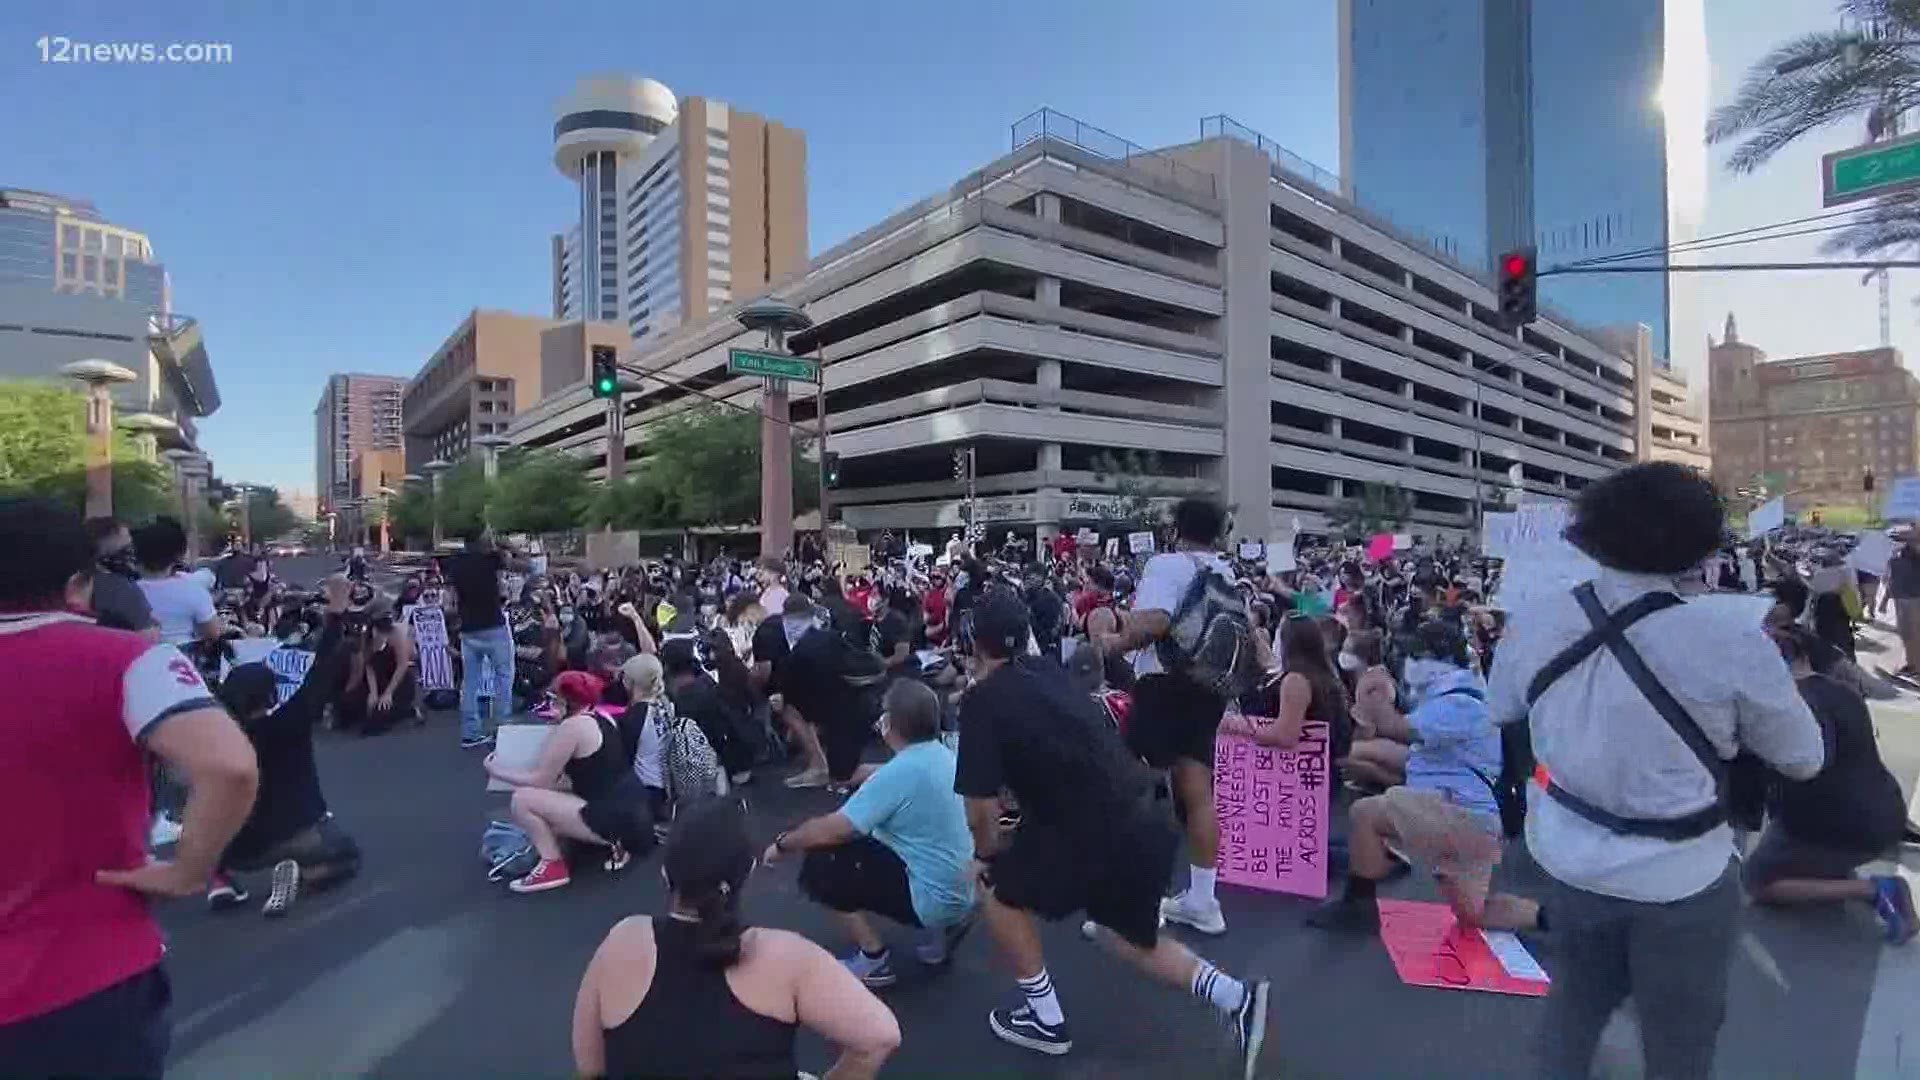 Hundreds of people have gathered in downtown Phoenix for another night of peaceful protests against police brutality.